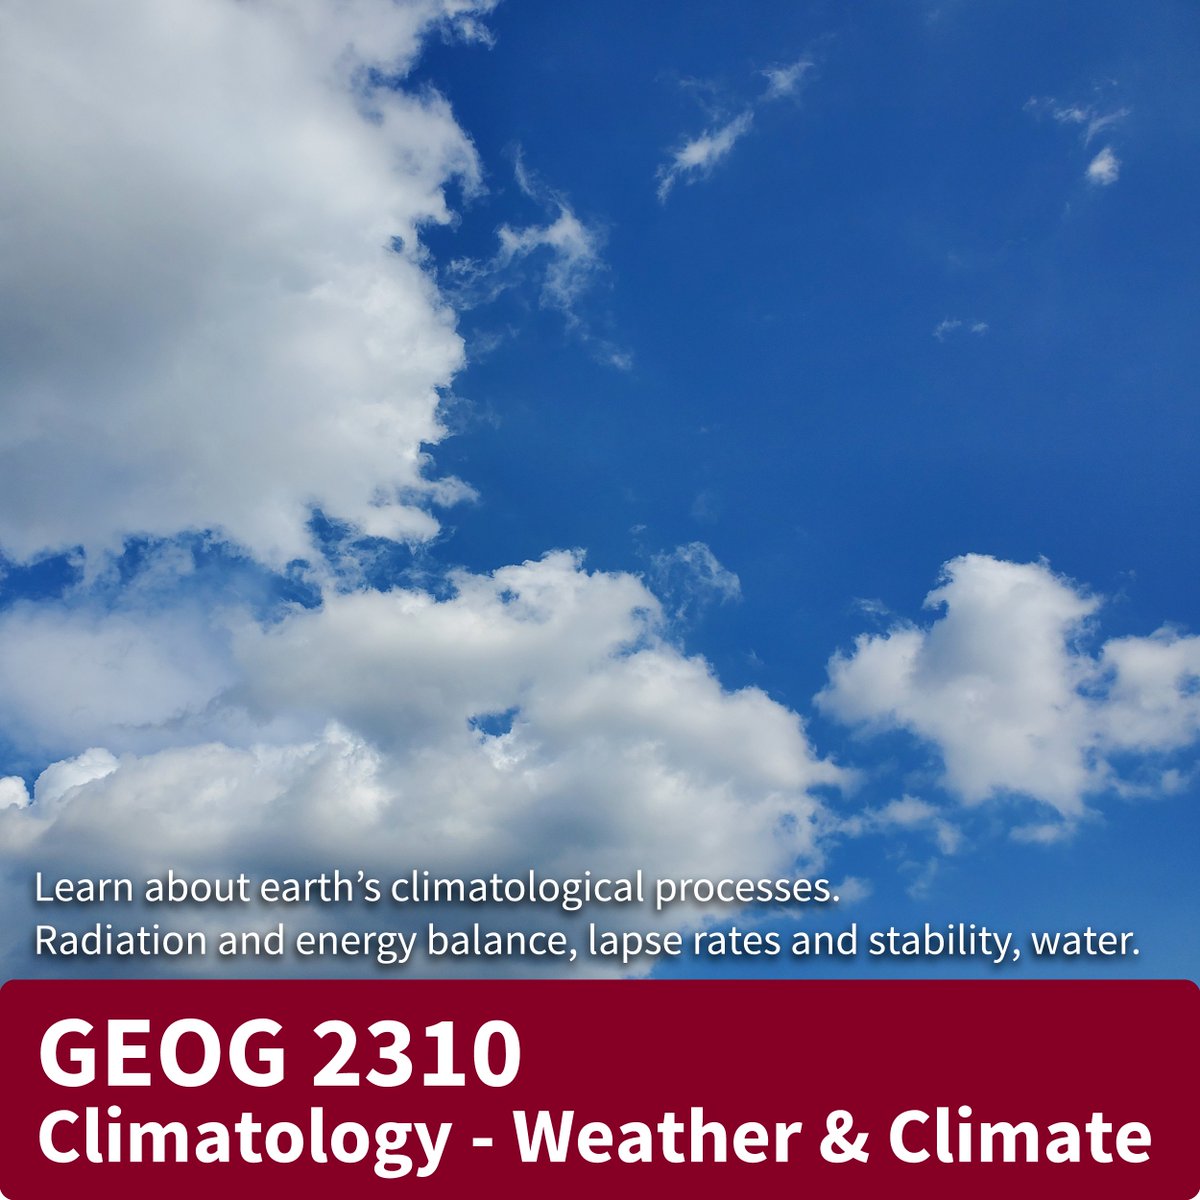 Students will apply scientific principles and methods to climatological processes and analyze climatological and meteorological concepts such as radiation and energy balance, lapse rates and stability, water budgets and general circulation modelling. kpu.ca/registration